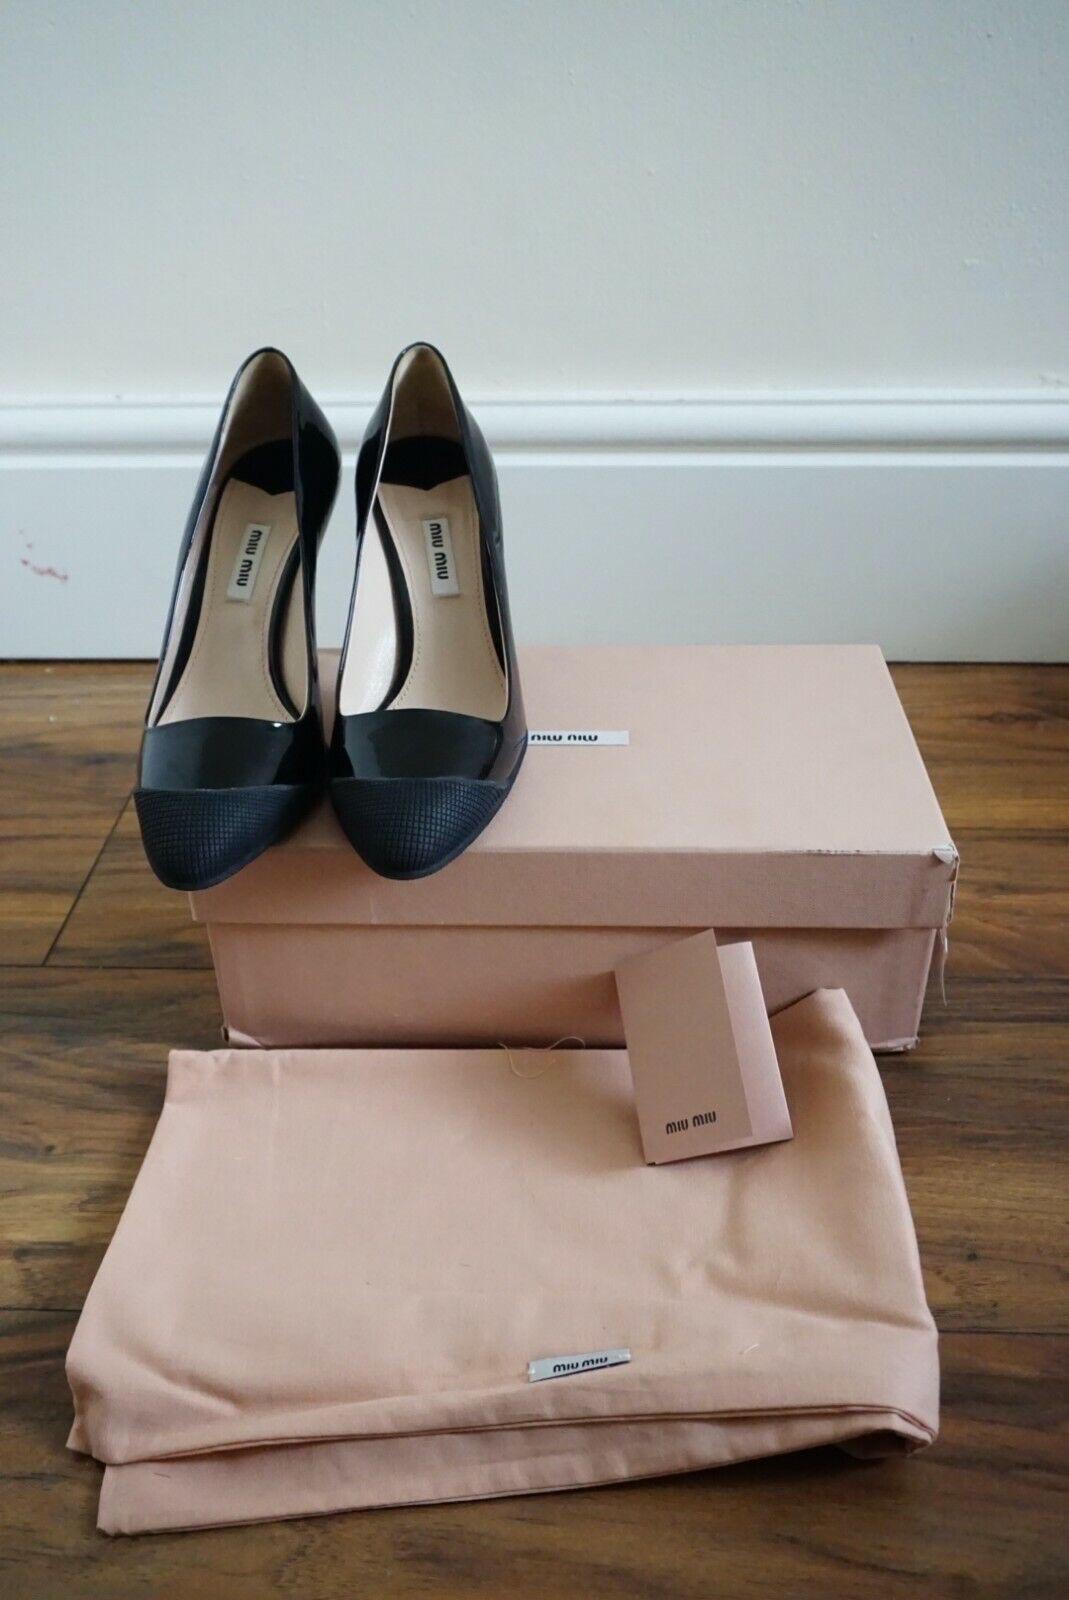 Miu Miu Vernice Patent Leather Pointed Heels Rubber Grip Soles Black 37.5 BNWT In Excellent Condition For Sale In Wokingham, England